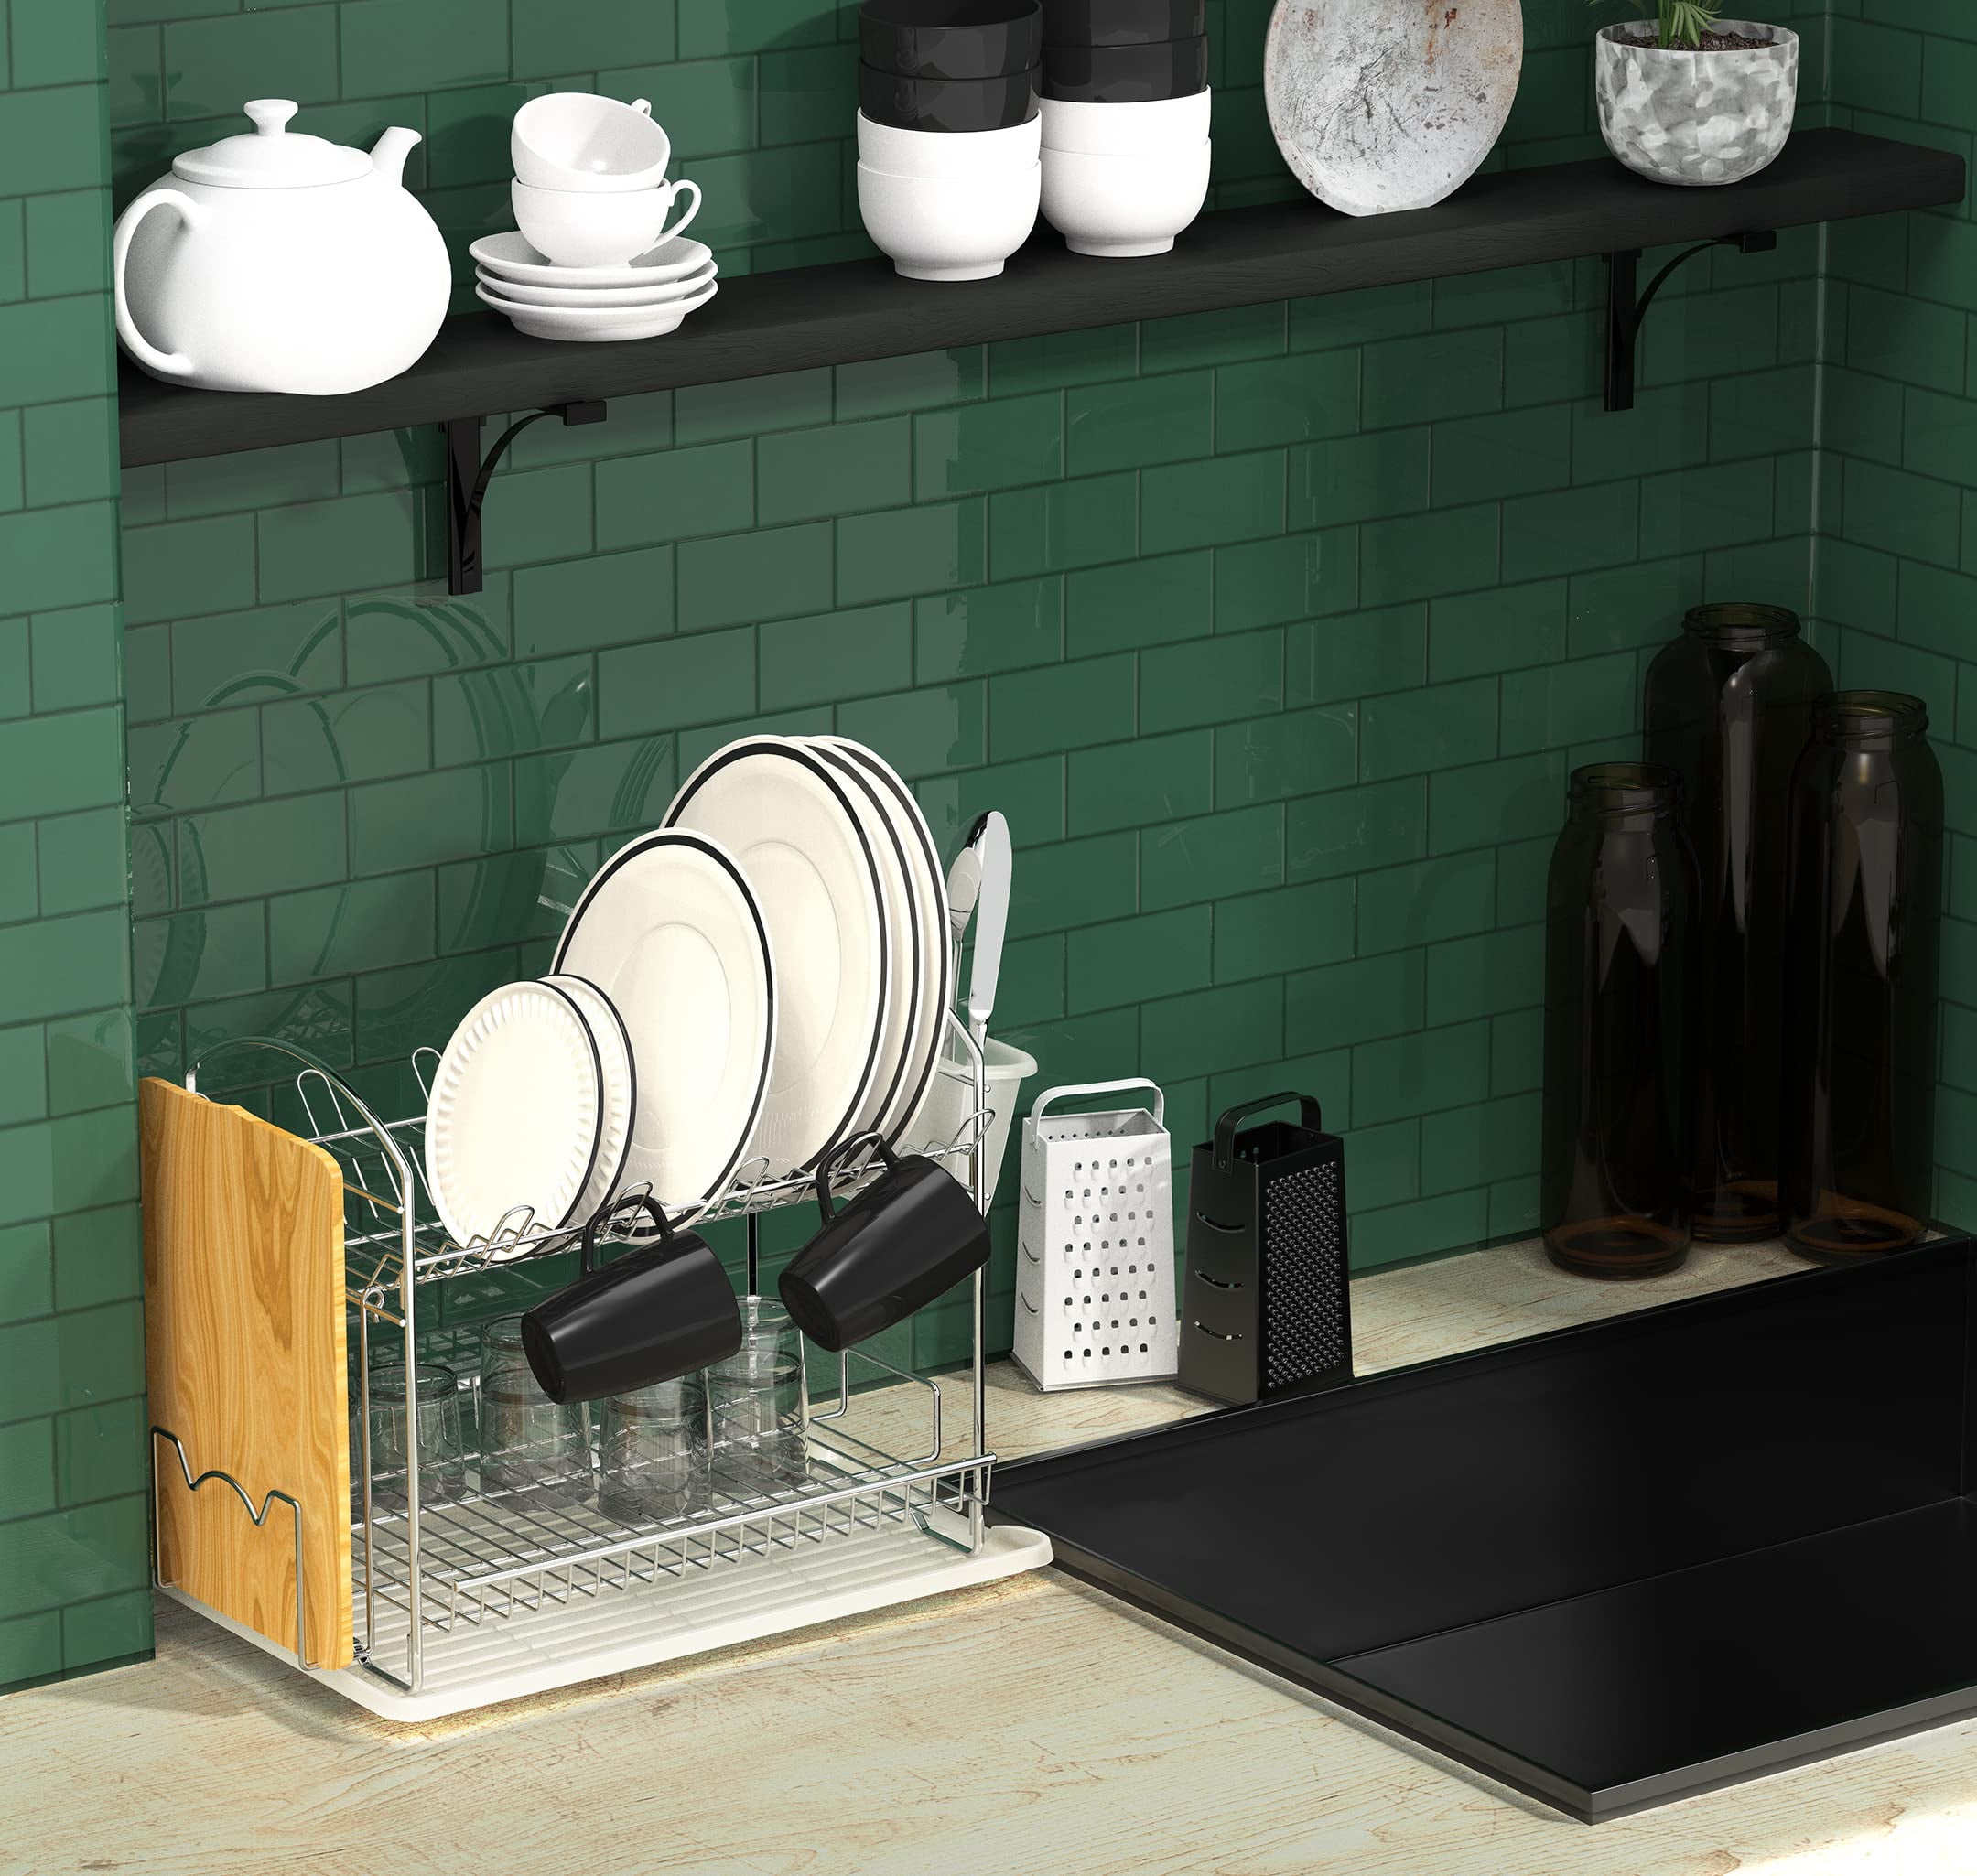 Simple 2-Tier Dish Drying Rack & Tray With Swivel Drain Spout